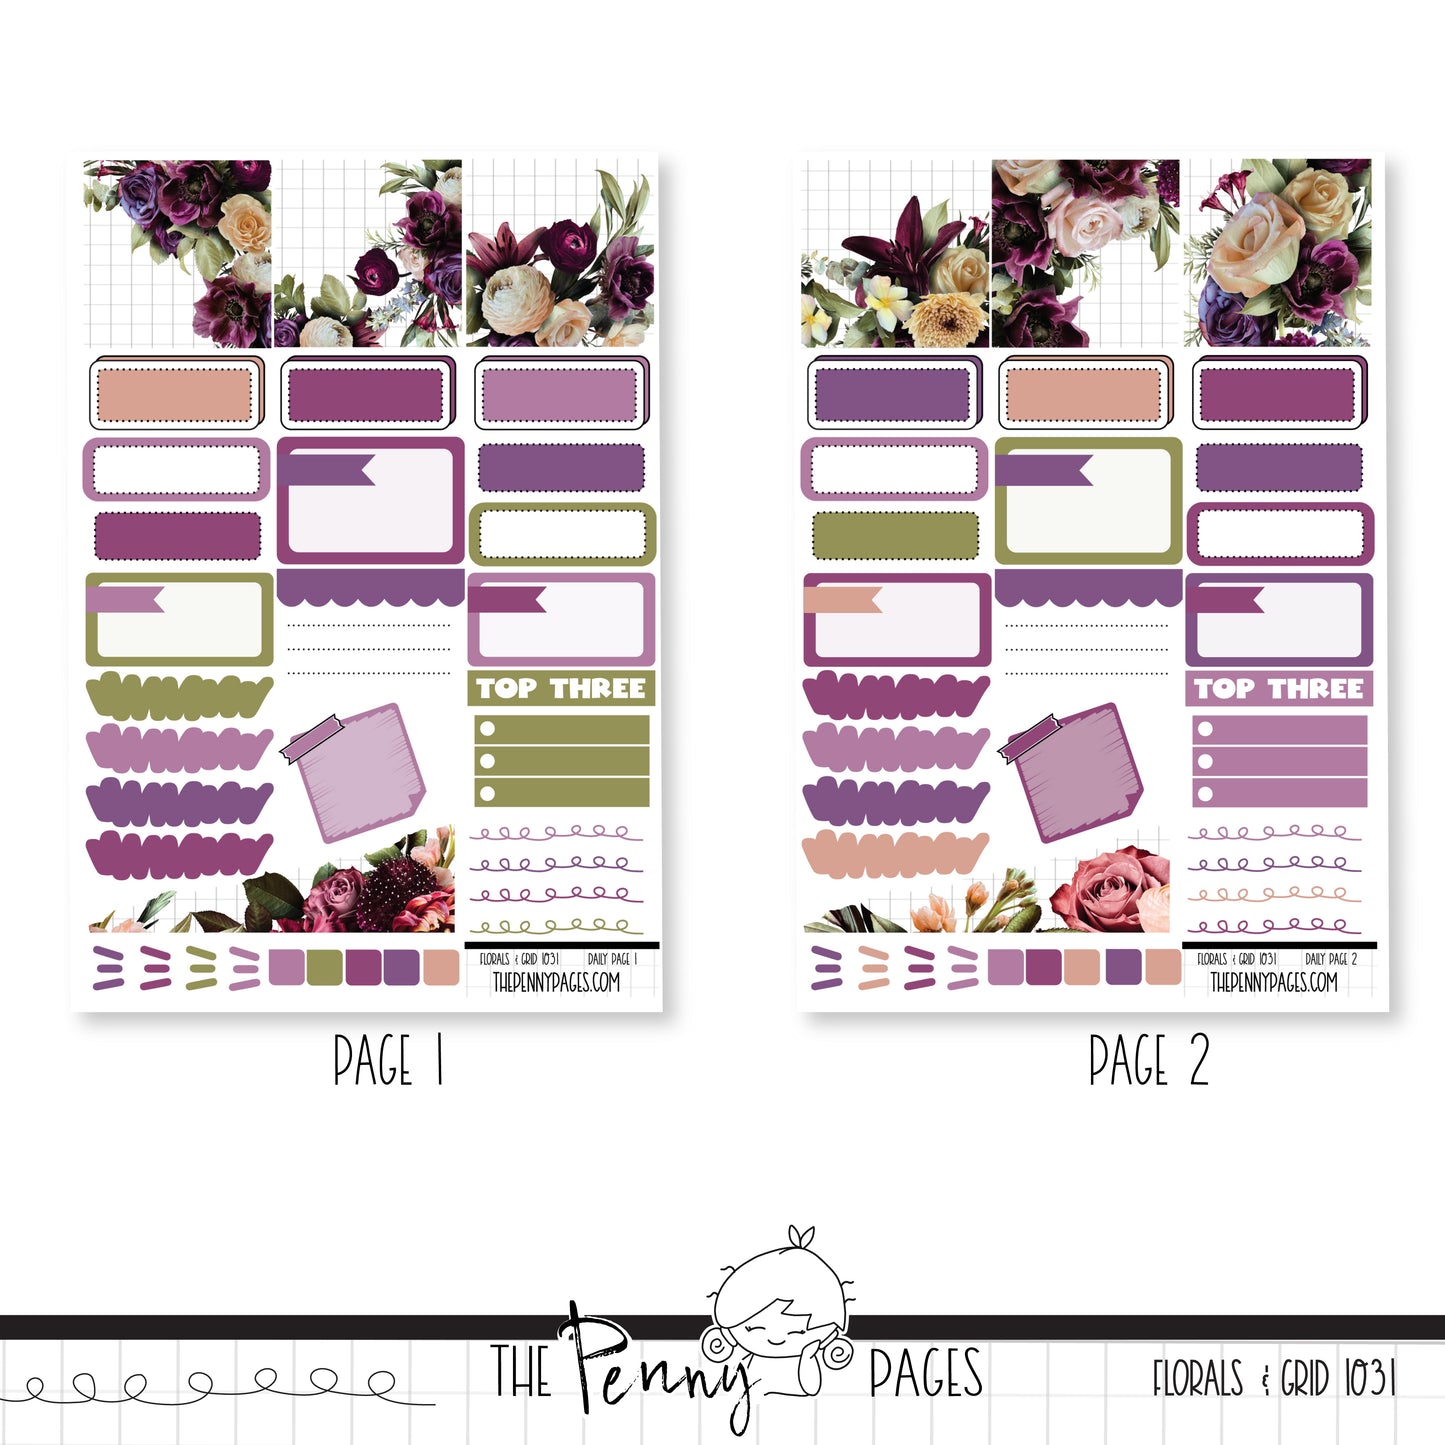 #1031 Florals & Grid  - Daily Pages